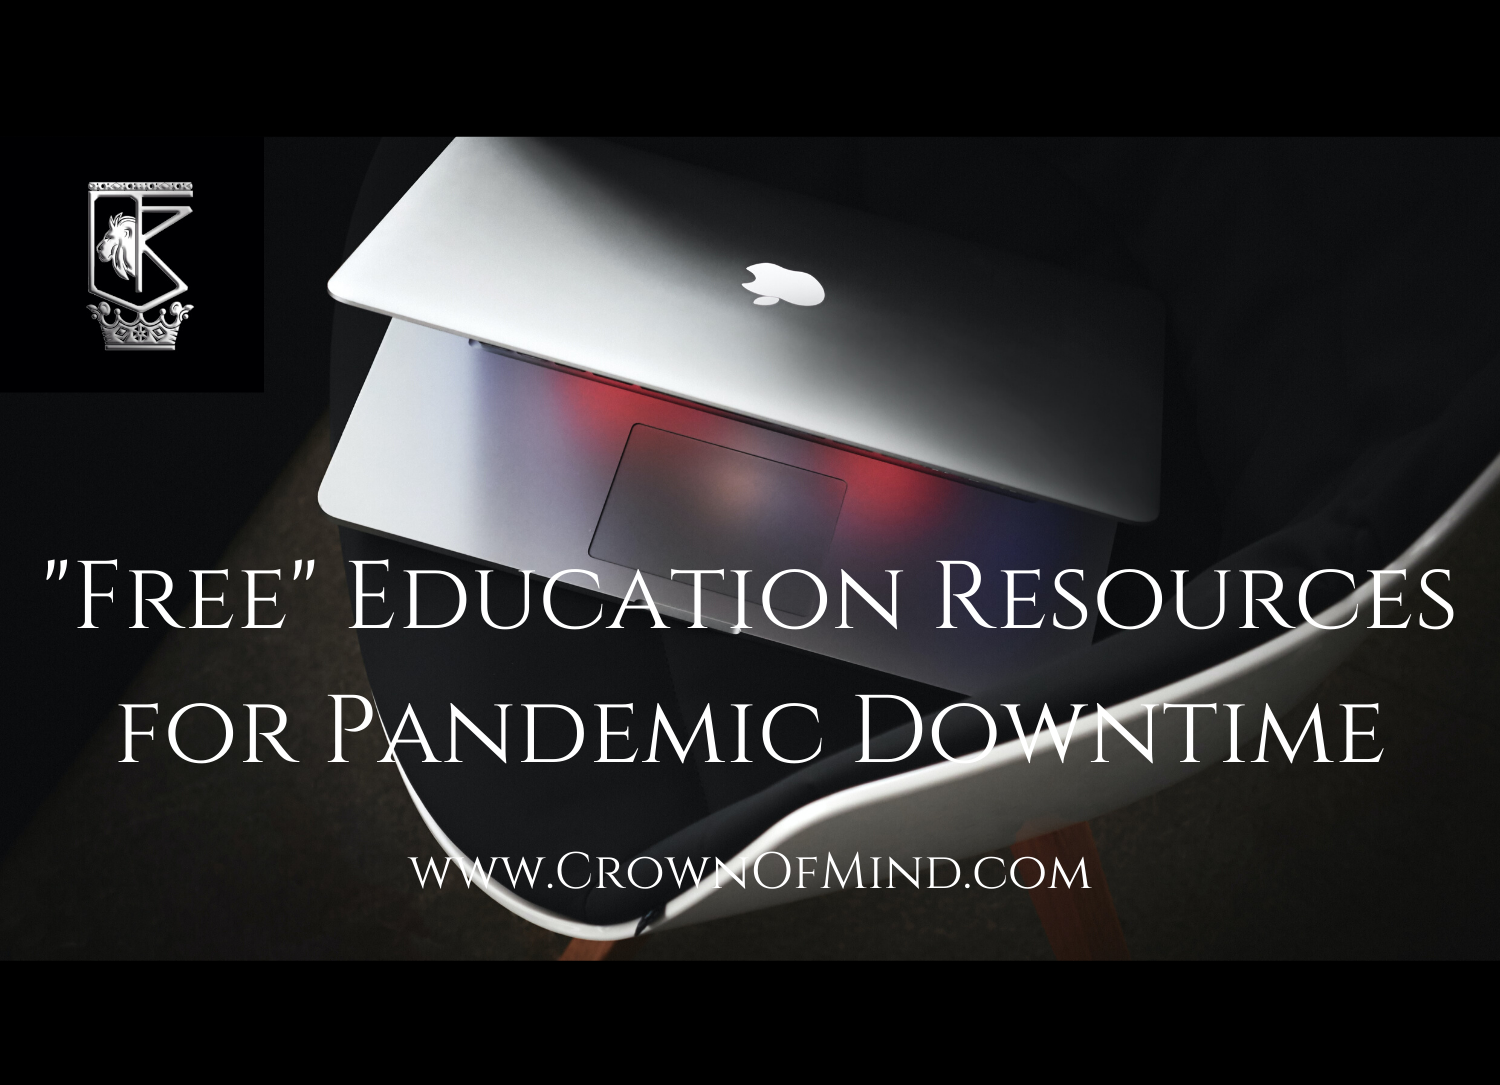 “Free” Education Resources for Pandemic Downtime